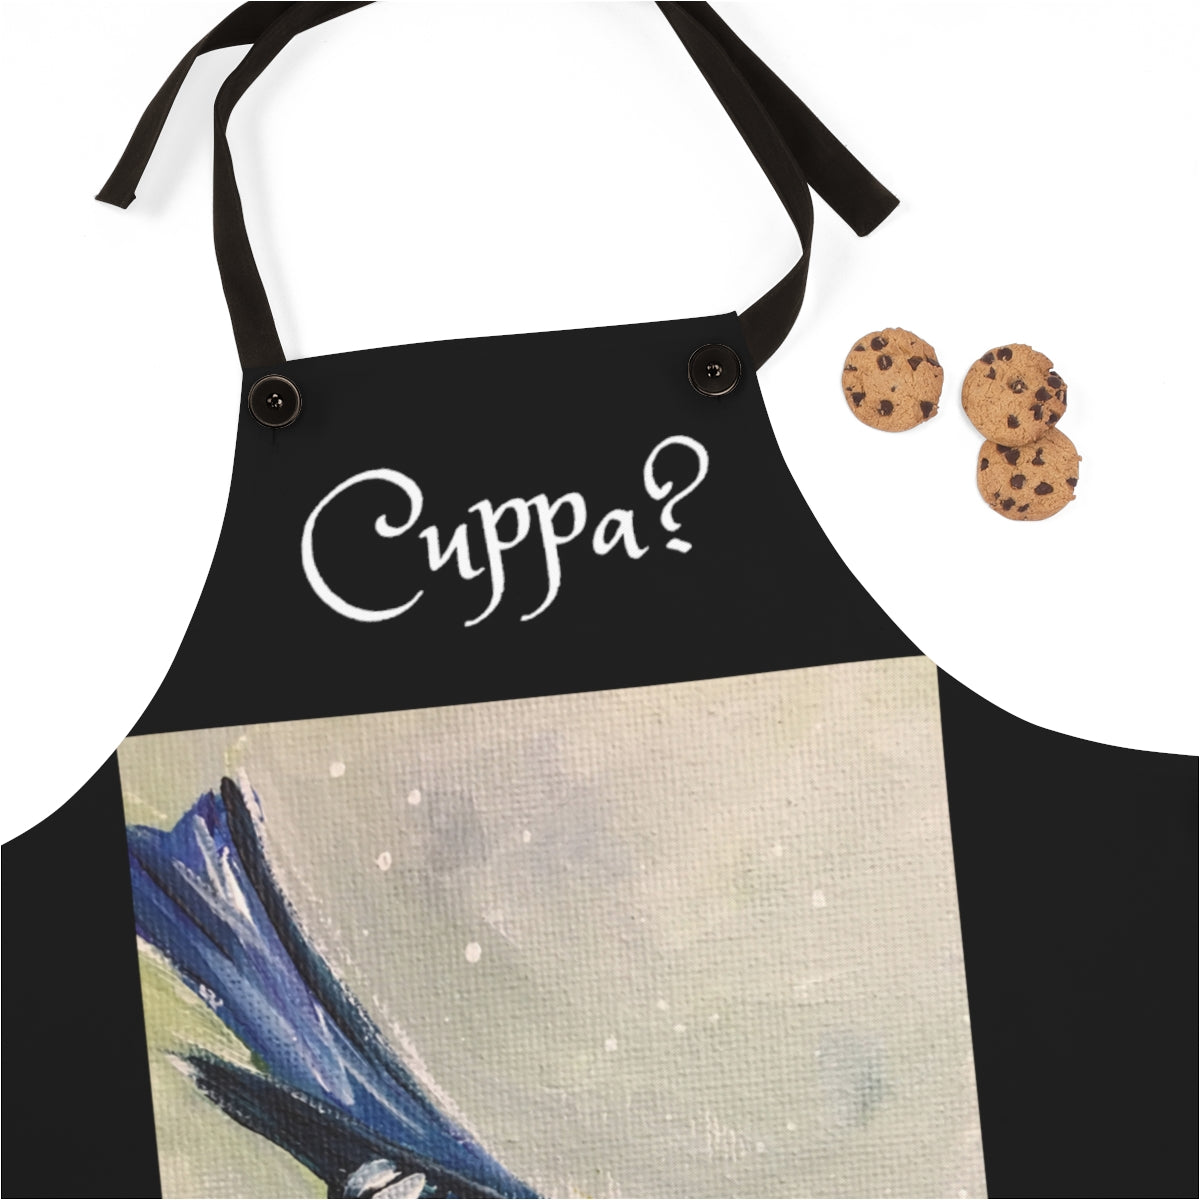 Cuppa? English UK phrase saying on a Black Kitchen Apron  with   Blue Tit  in the Snow